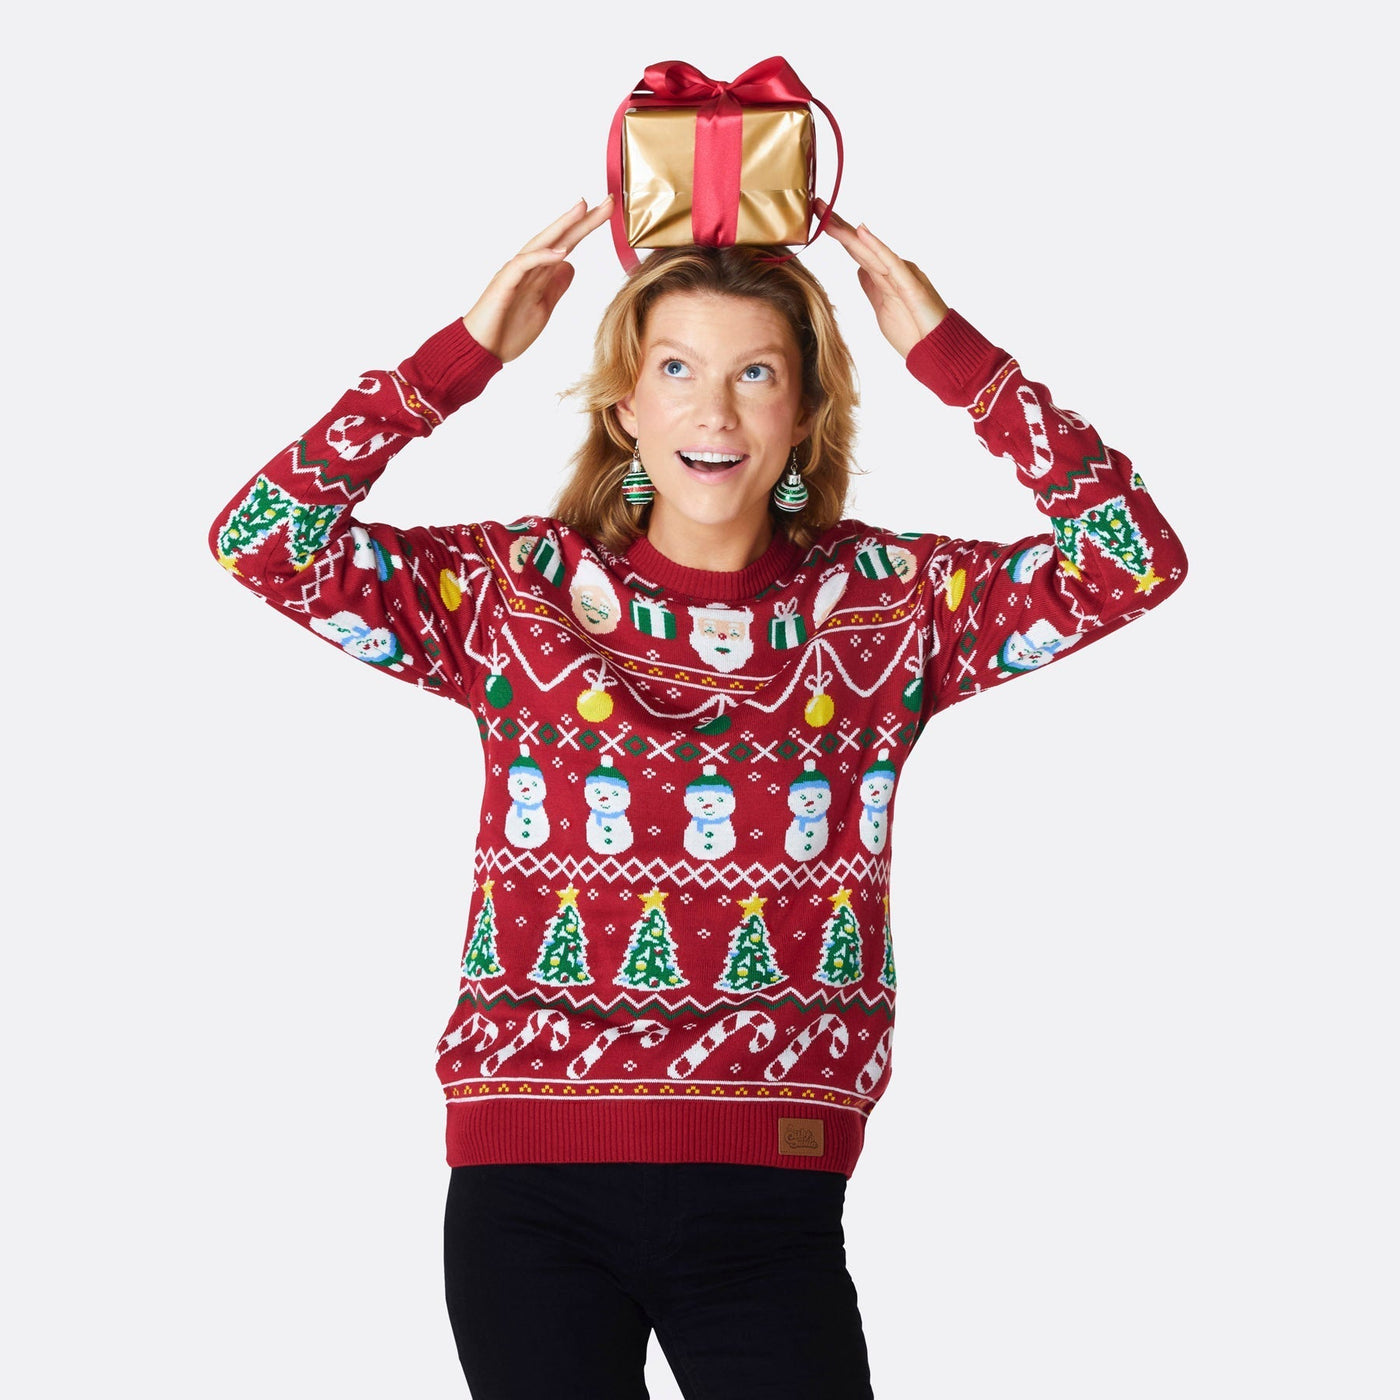 Women's Striped Red Christmas Sweater